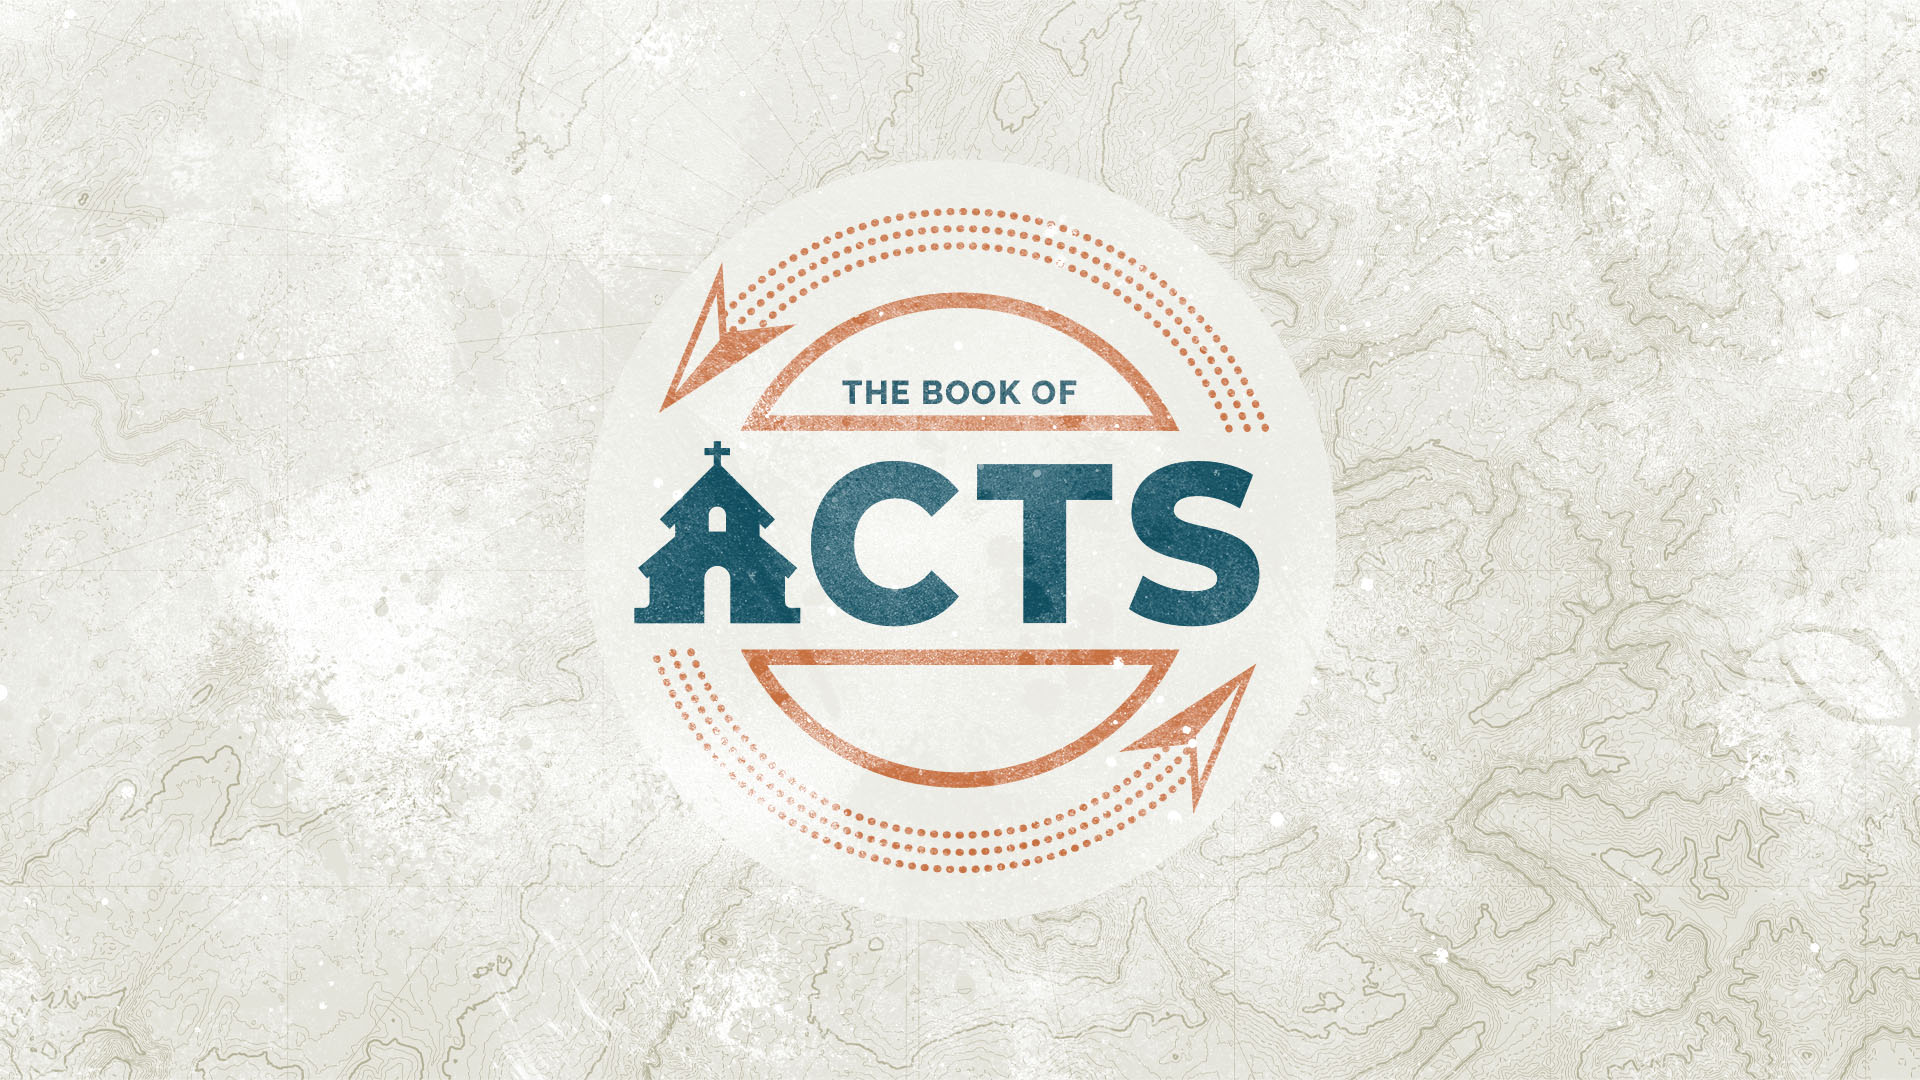 ACTS | A SINGULARLY FOCUSED MISSION